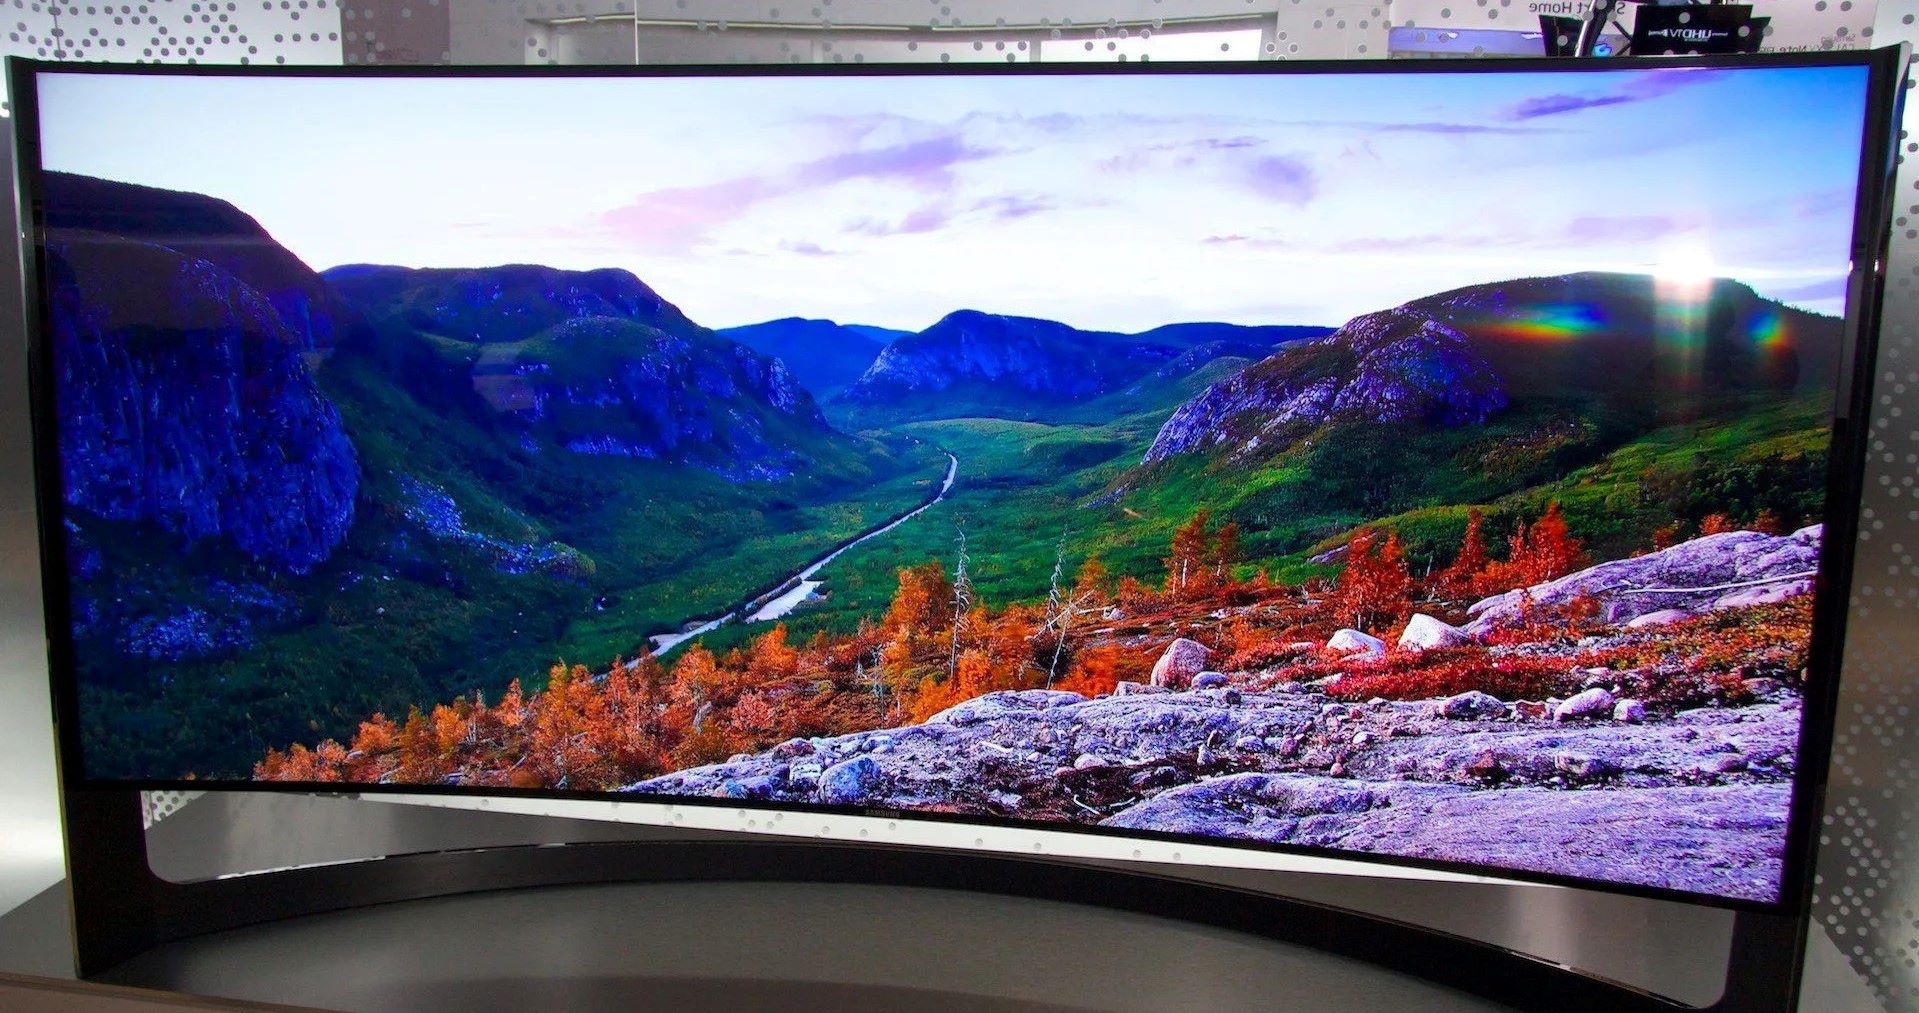 curved-screen-tvs-what-you-need-to-know-before-you-buy